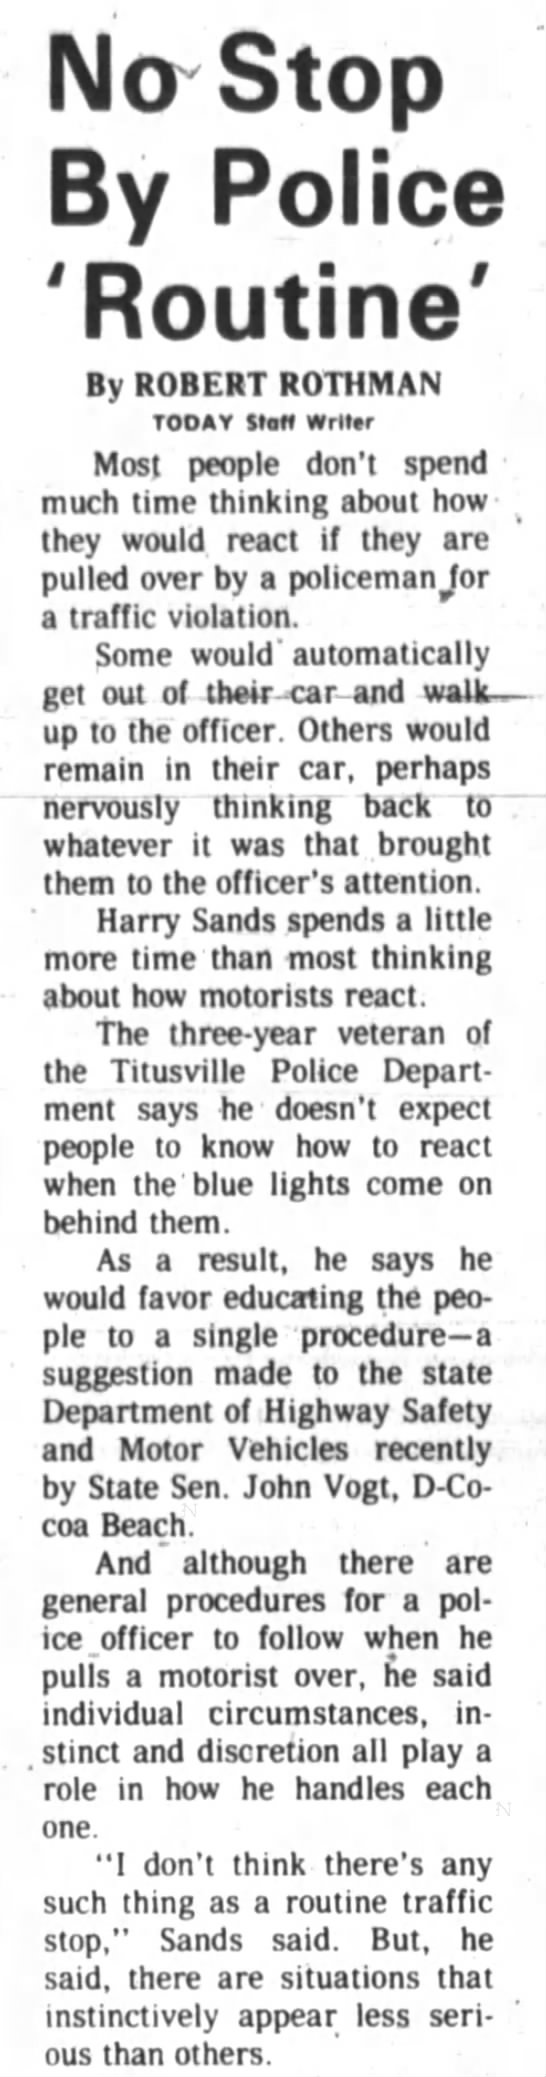 "There's no such thing as a routine traffic stop" (1975). - 